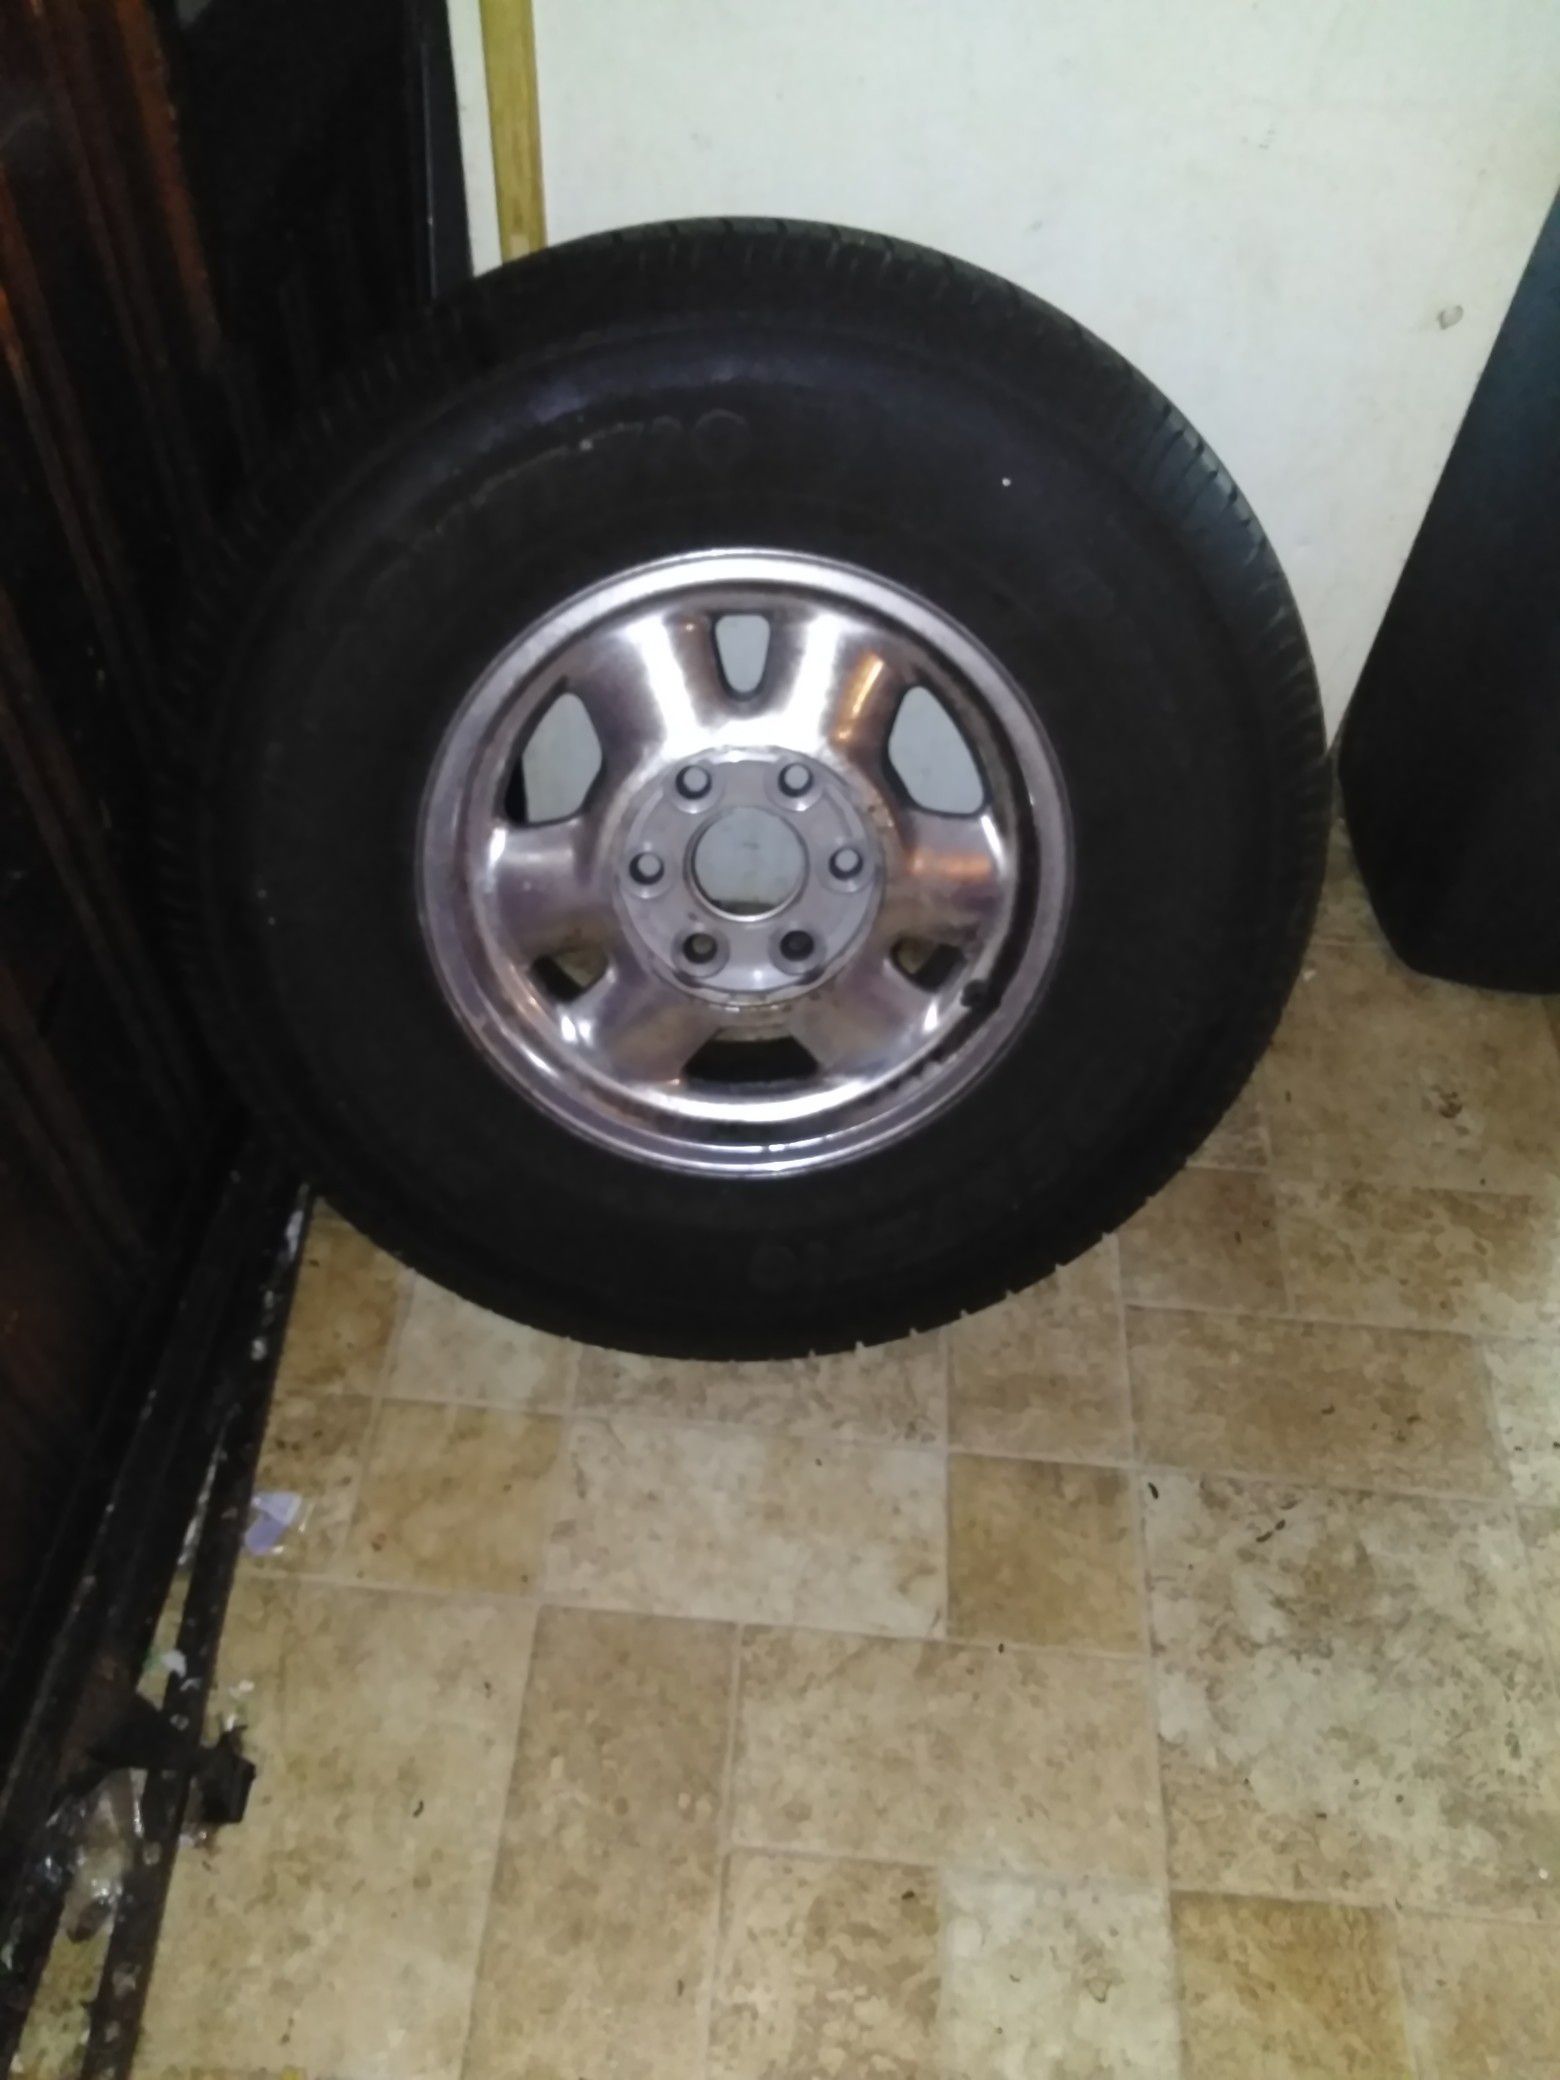 Chrome GMC rims 2 of the rims have brand new tires need tires or best offer willing to trade for lowrider bikes or parts